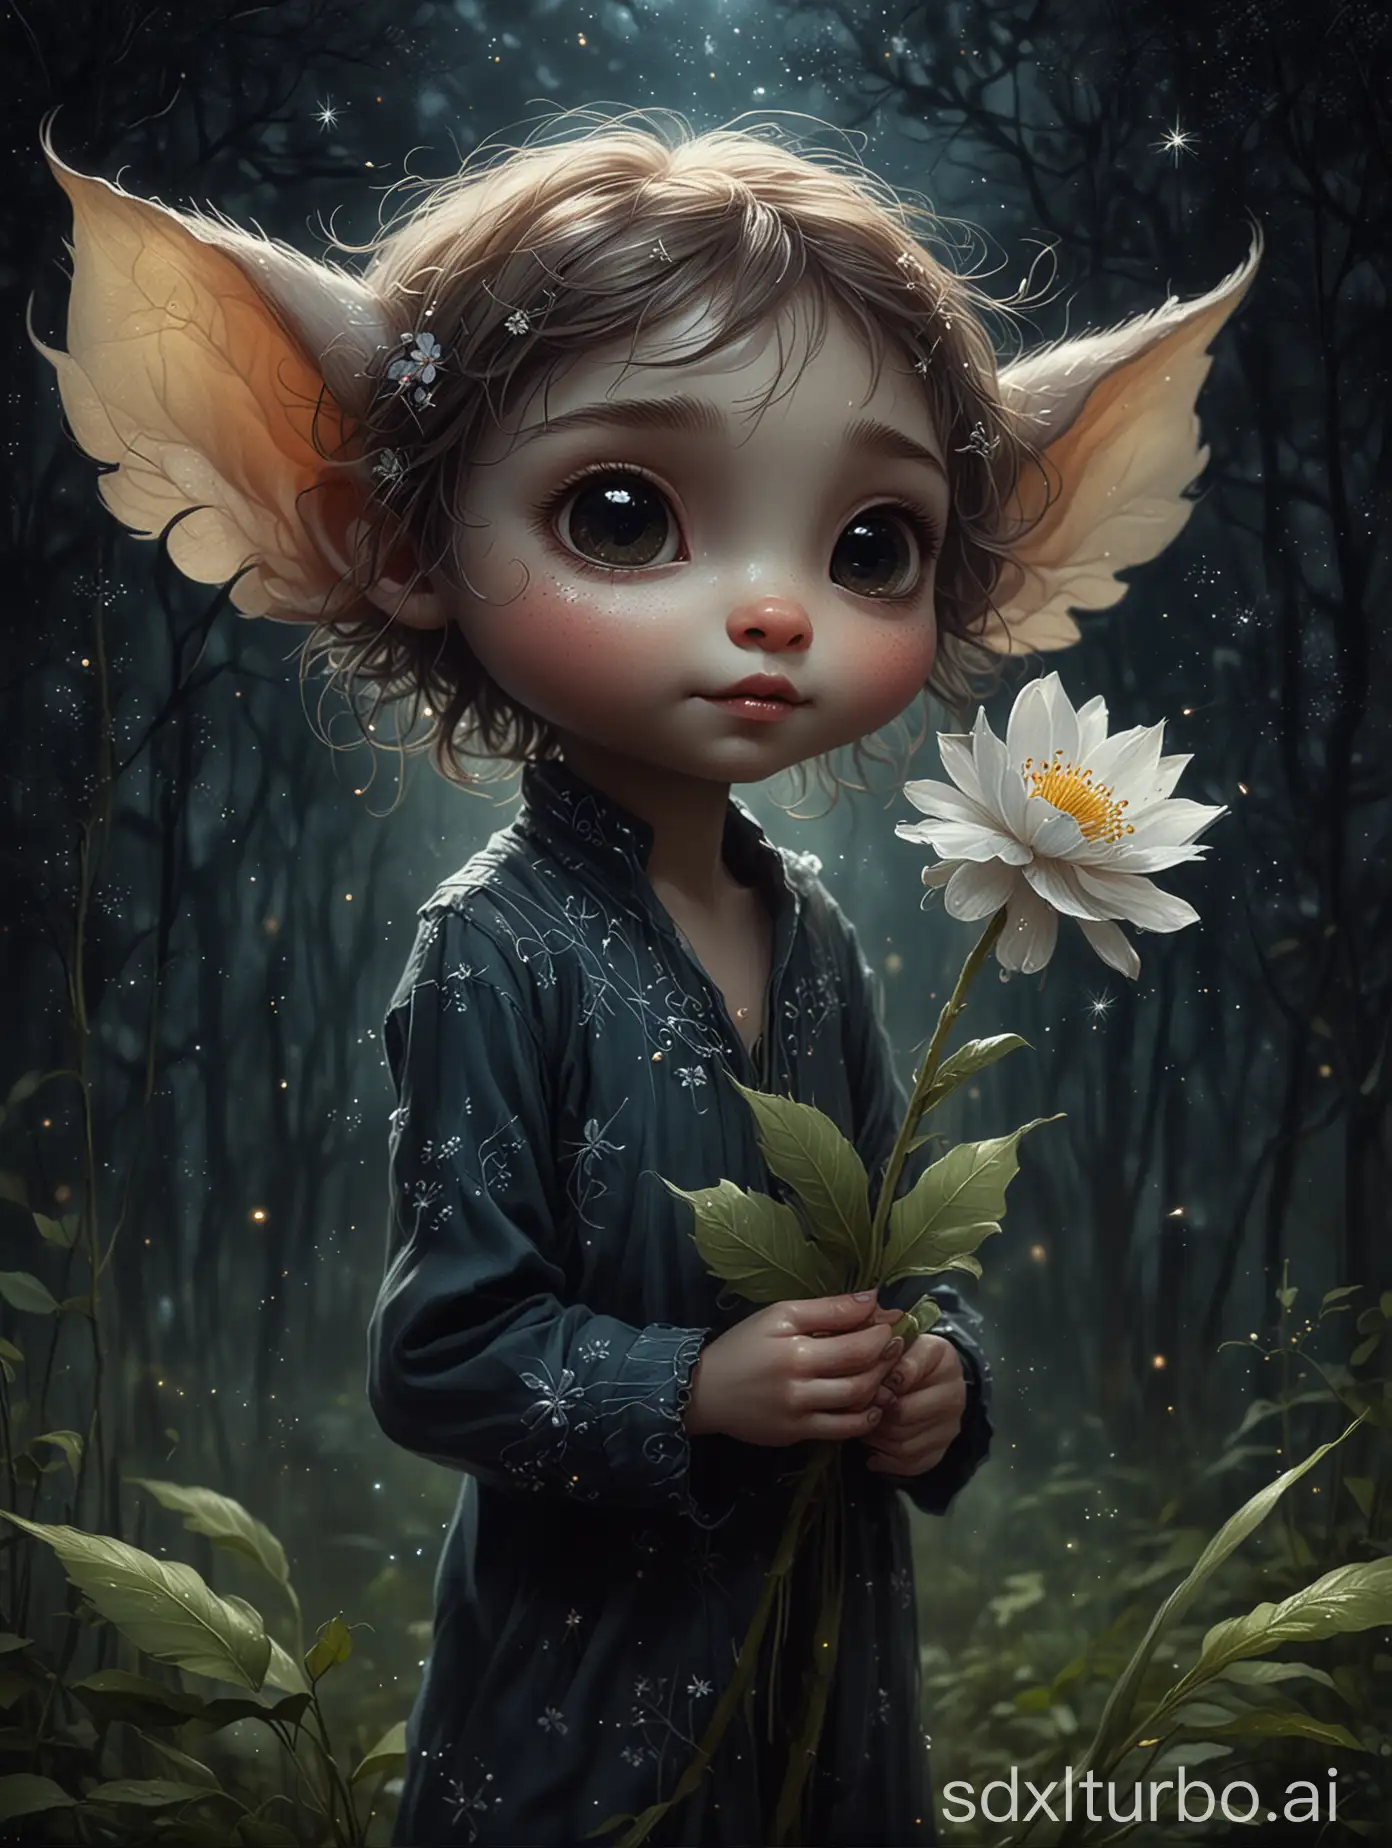 Art by mandy disher
Art by Charlie Bowater
close-up of a tiny cute scrawny creature holding a flower in a dark forest, starry sky, atmospheric, focus depth, highly detailed oil painting, Artstation